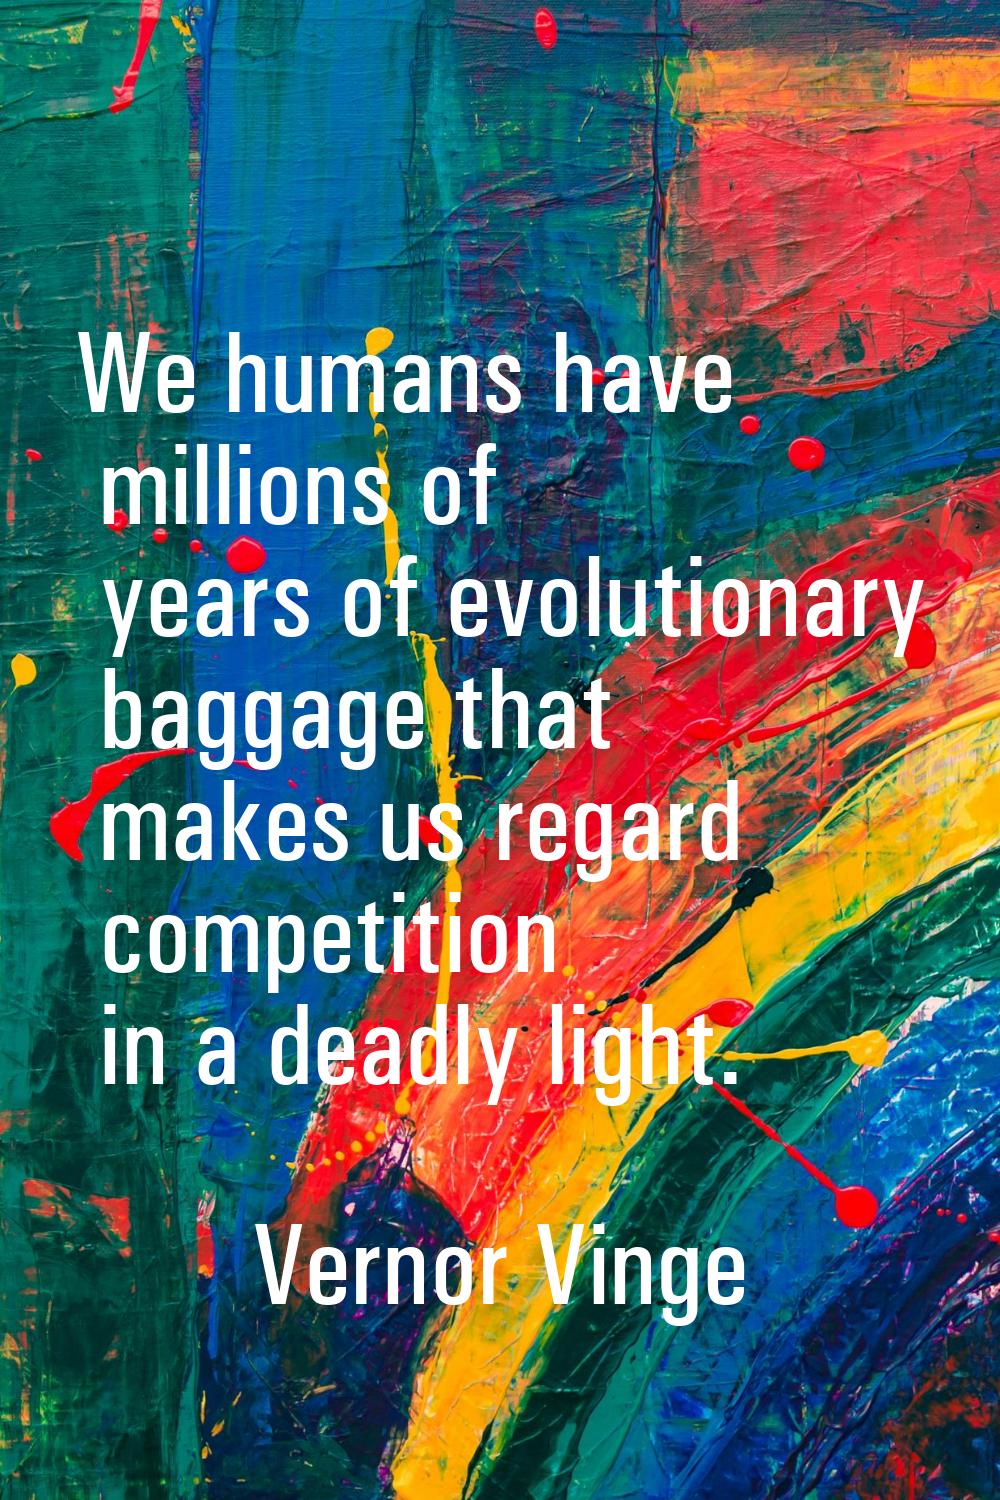 We humans have millions of years of evolutionary baggage that makes us regard competition in a dead